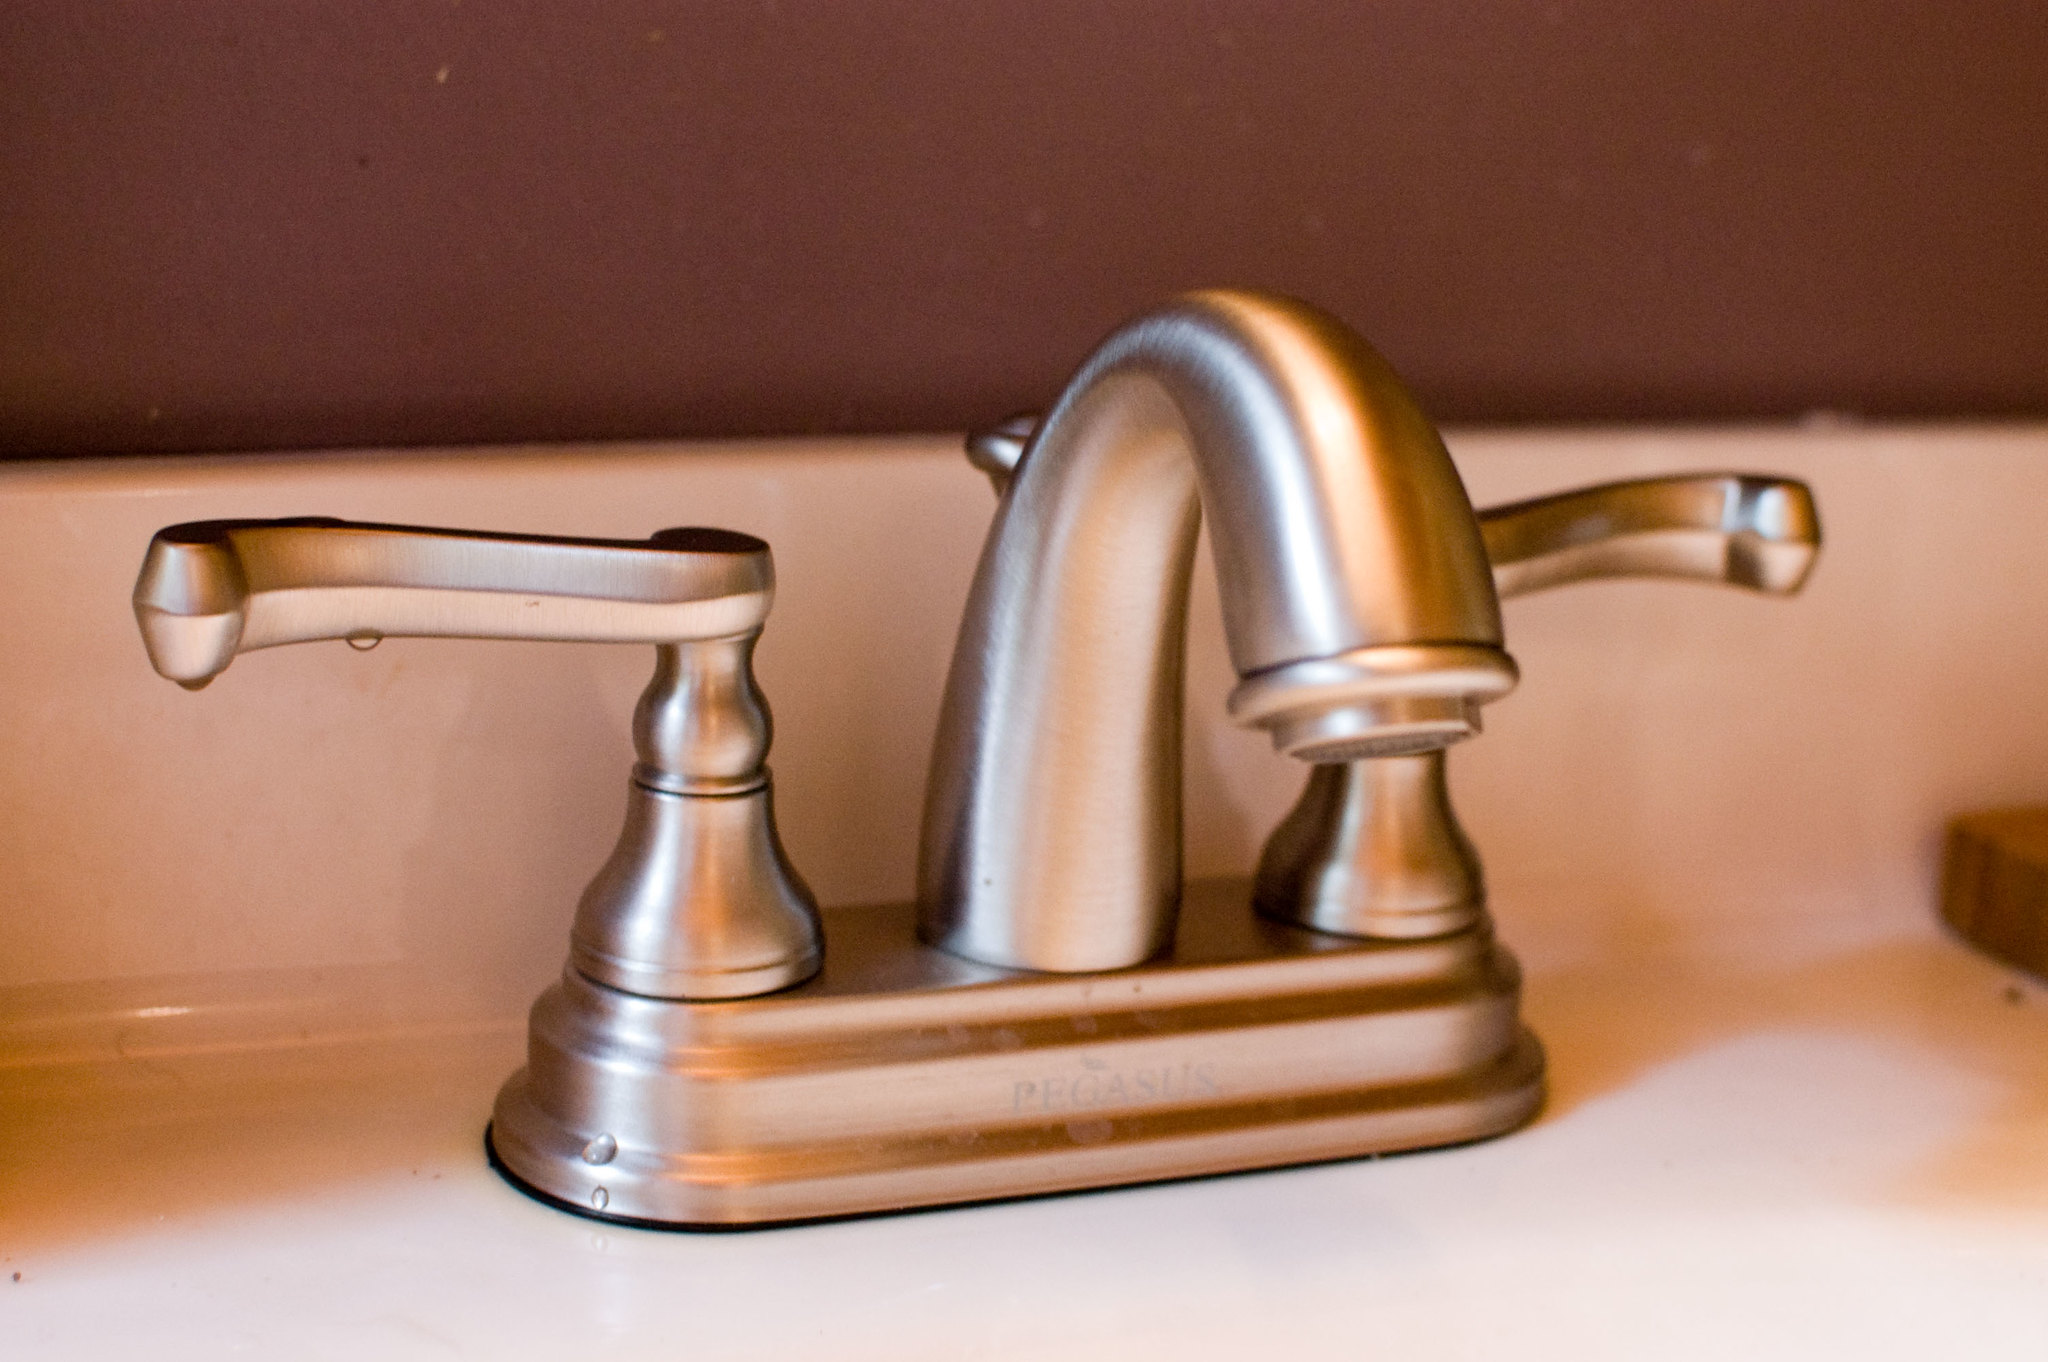 How to Install a New Faucet